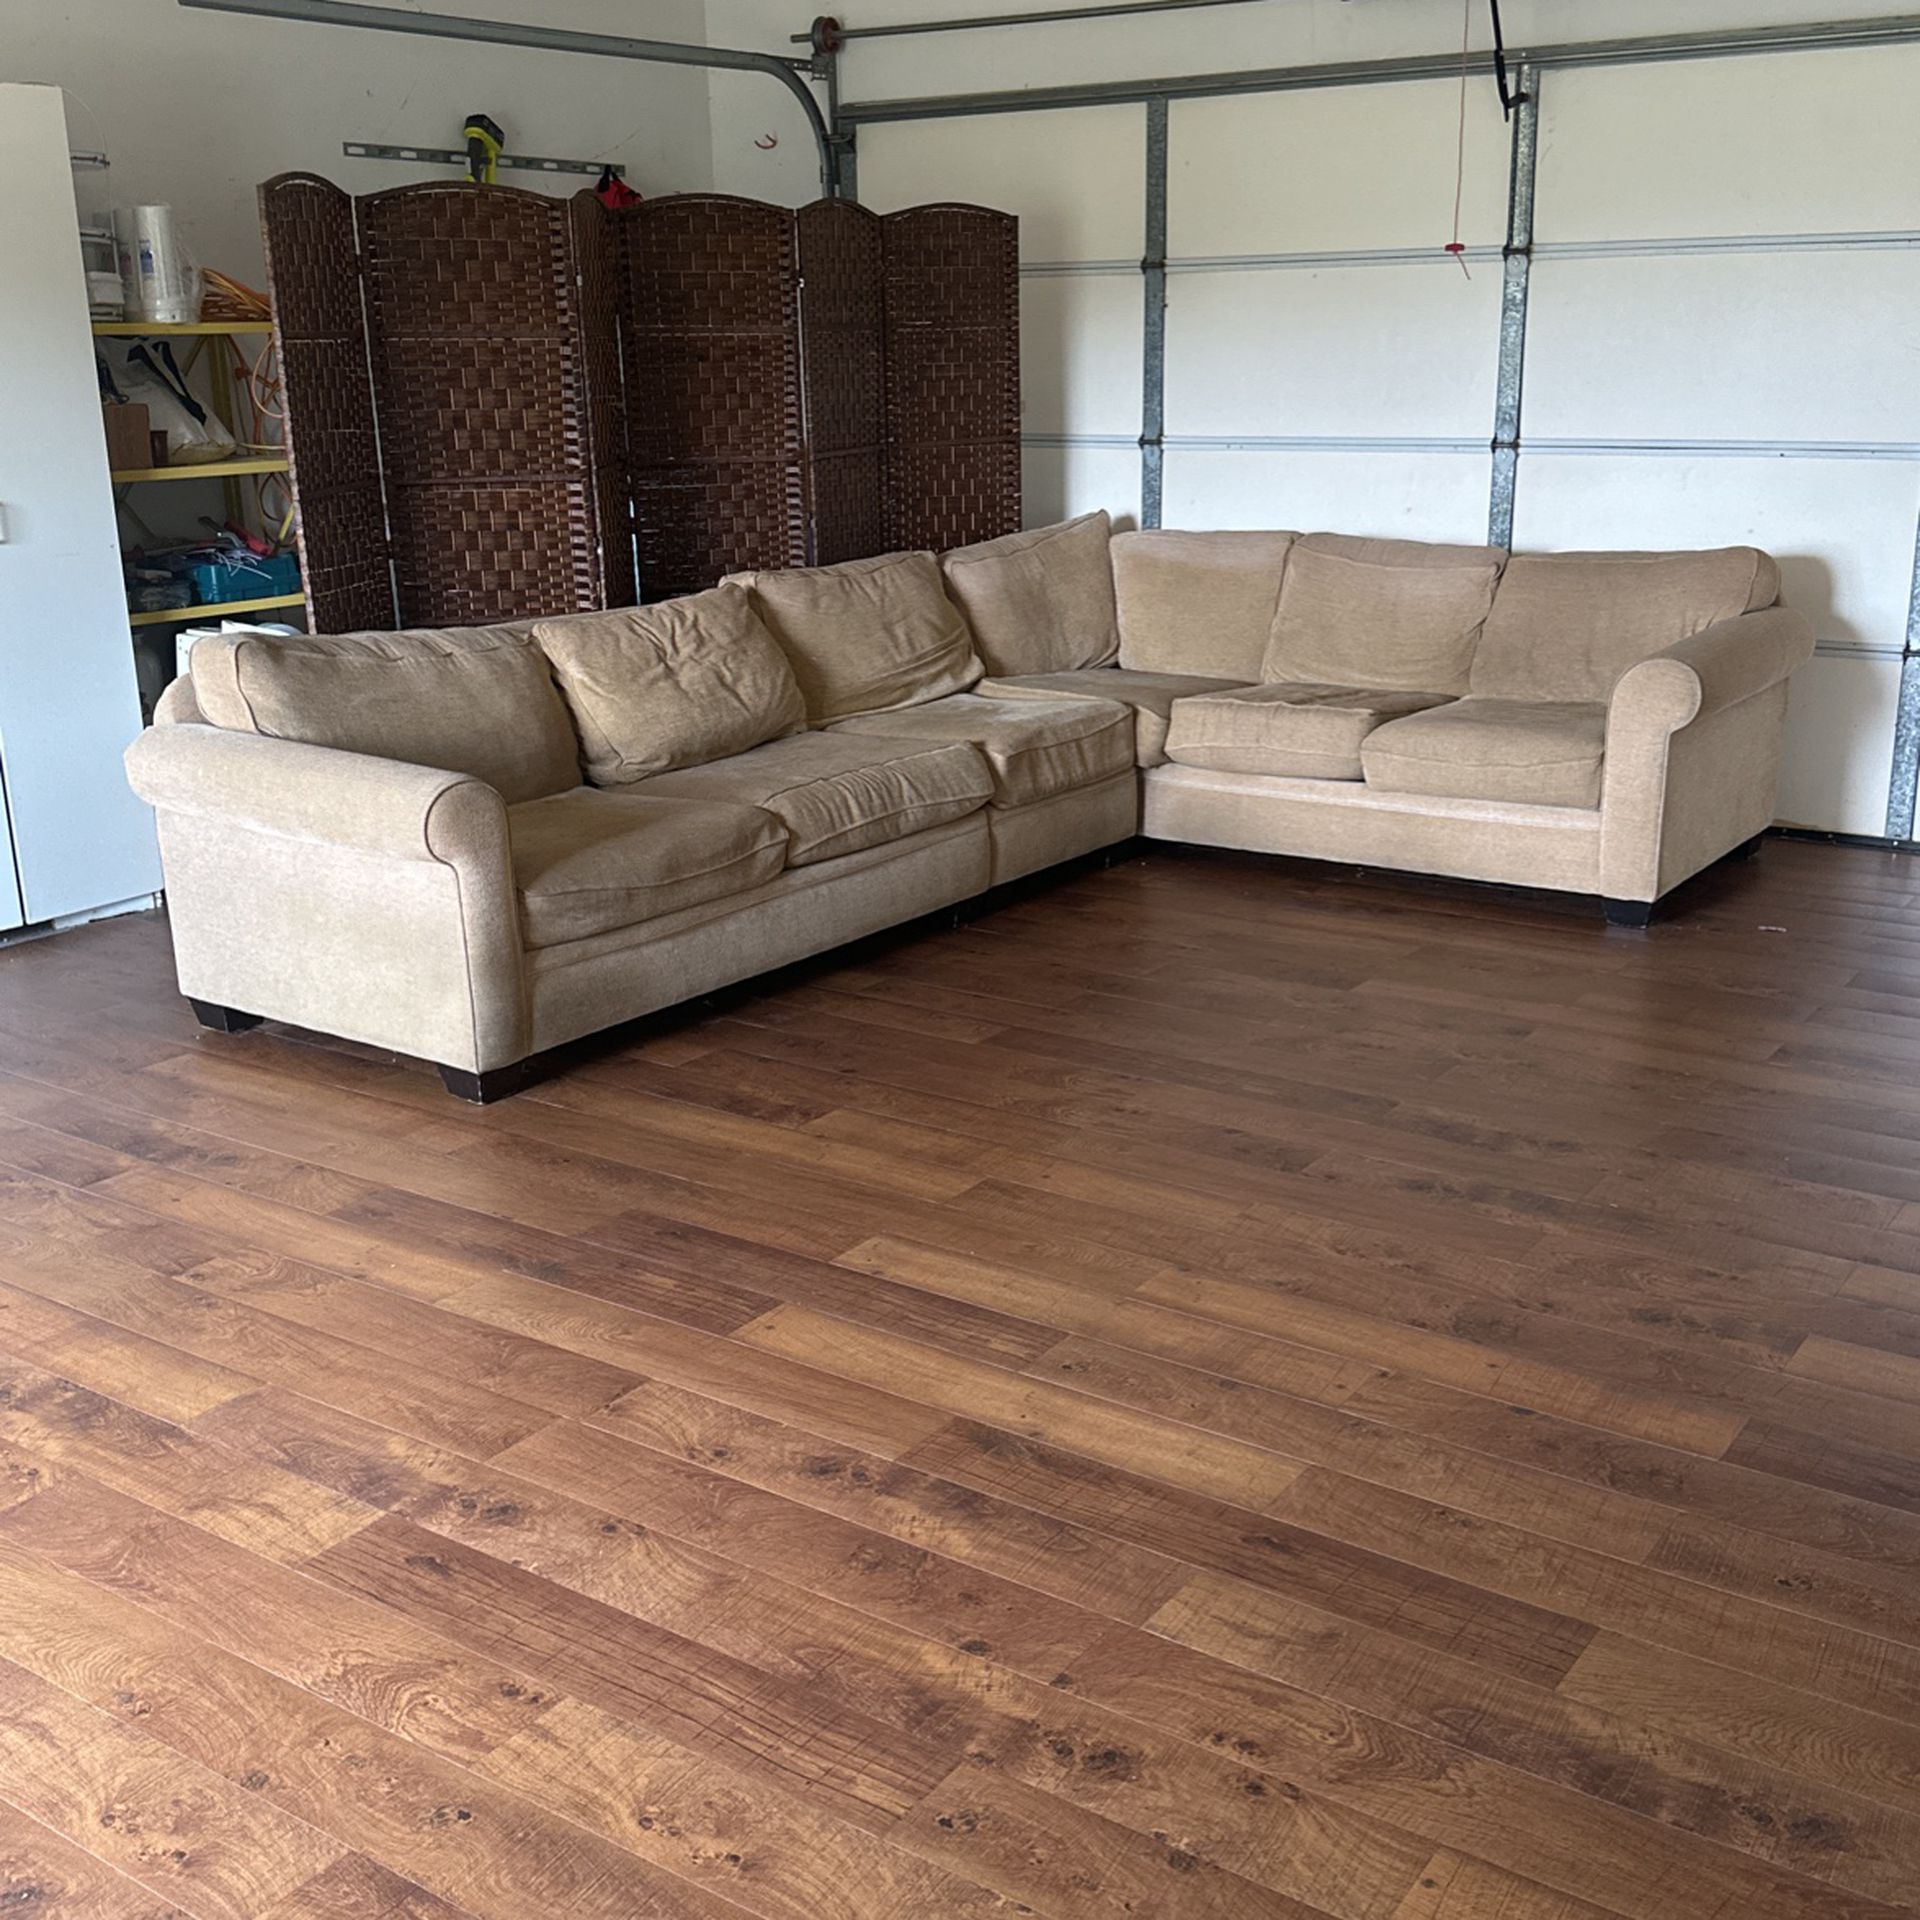 FREE Tan Sectional Couch 